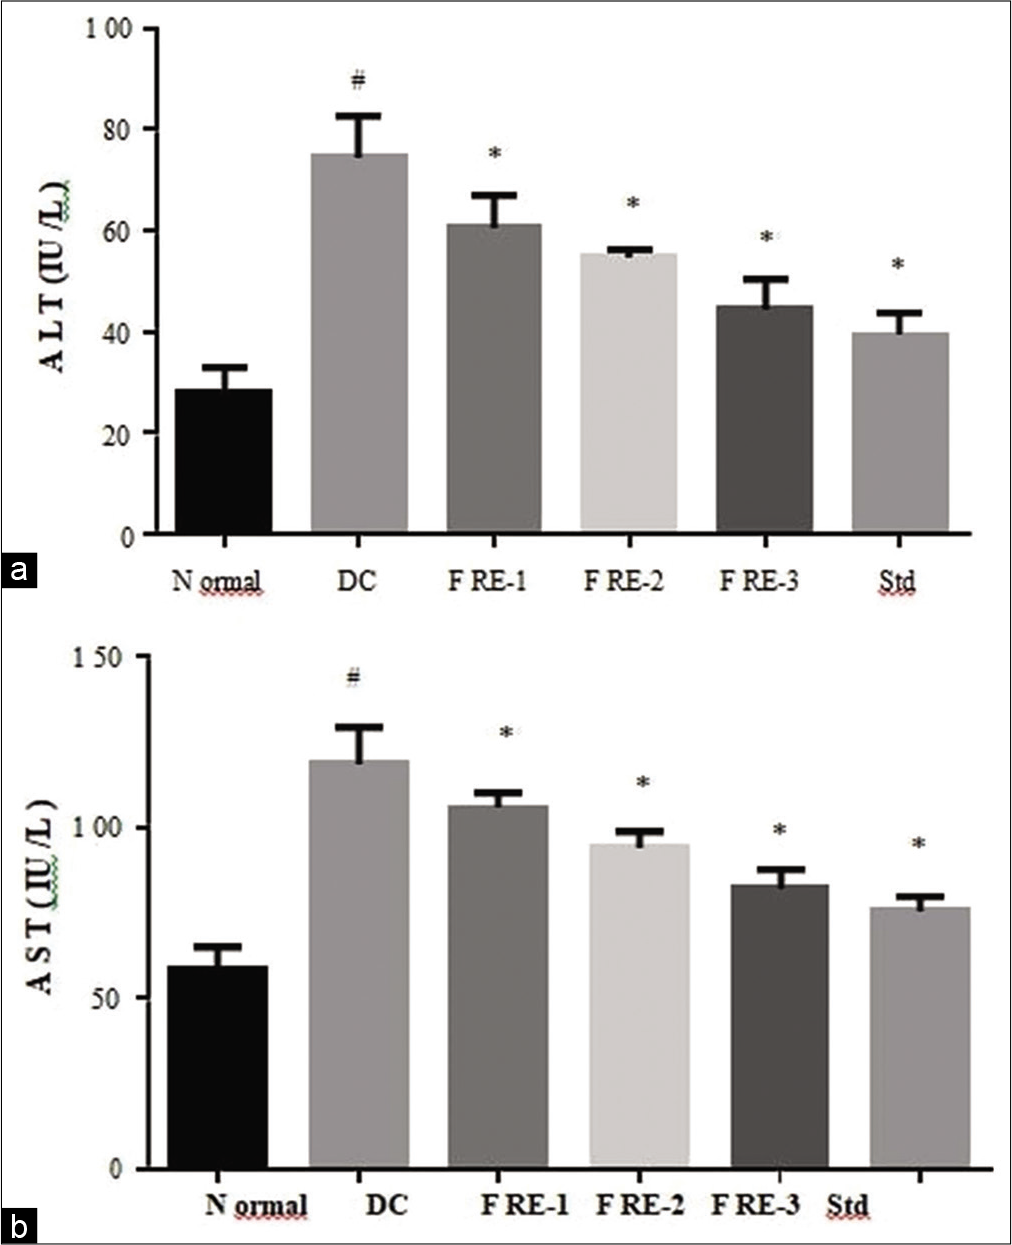 Effects of methanolic extract of Ficus racemosa (FRE) on serum Aspartate transferase activity (a) and serum Alanine transferase activity (b) DC= disease control; FRE-1= 100mg/kg; FRE-2= 200mg/kg; FRE-3= 400mg/kg; Std= 20mg/kg Atorvastatin #Significantly different from normal control group, P < 0.05; *Significantly different from disease control group, P < 0.05.